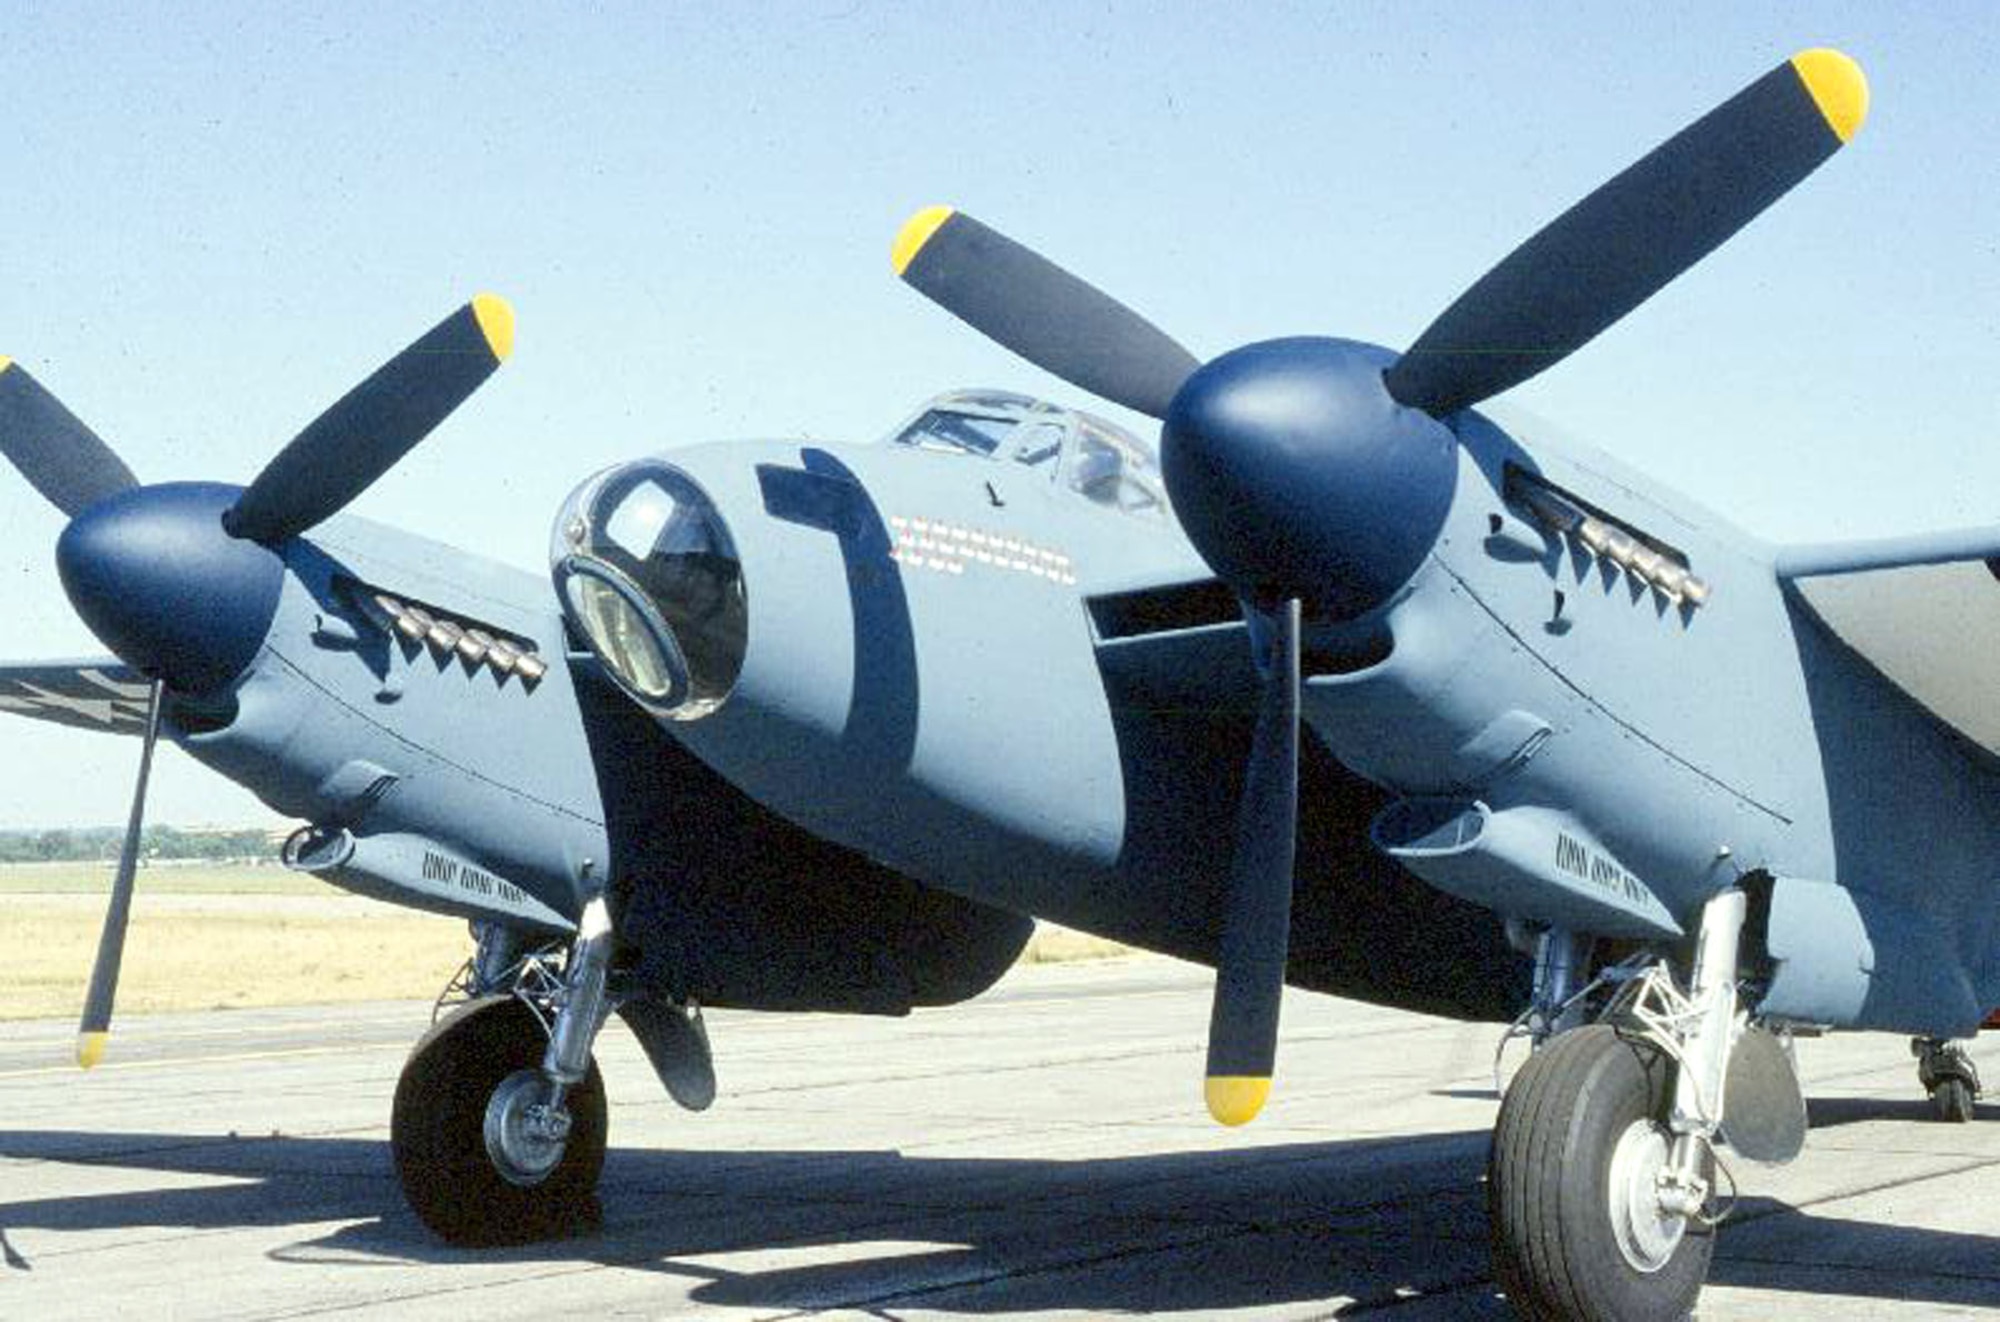 DAYTON, Ohio -- De Havilland DH 98 Mosquito at the National Museum of the United States Air Force. (U.S. Air Force photo)